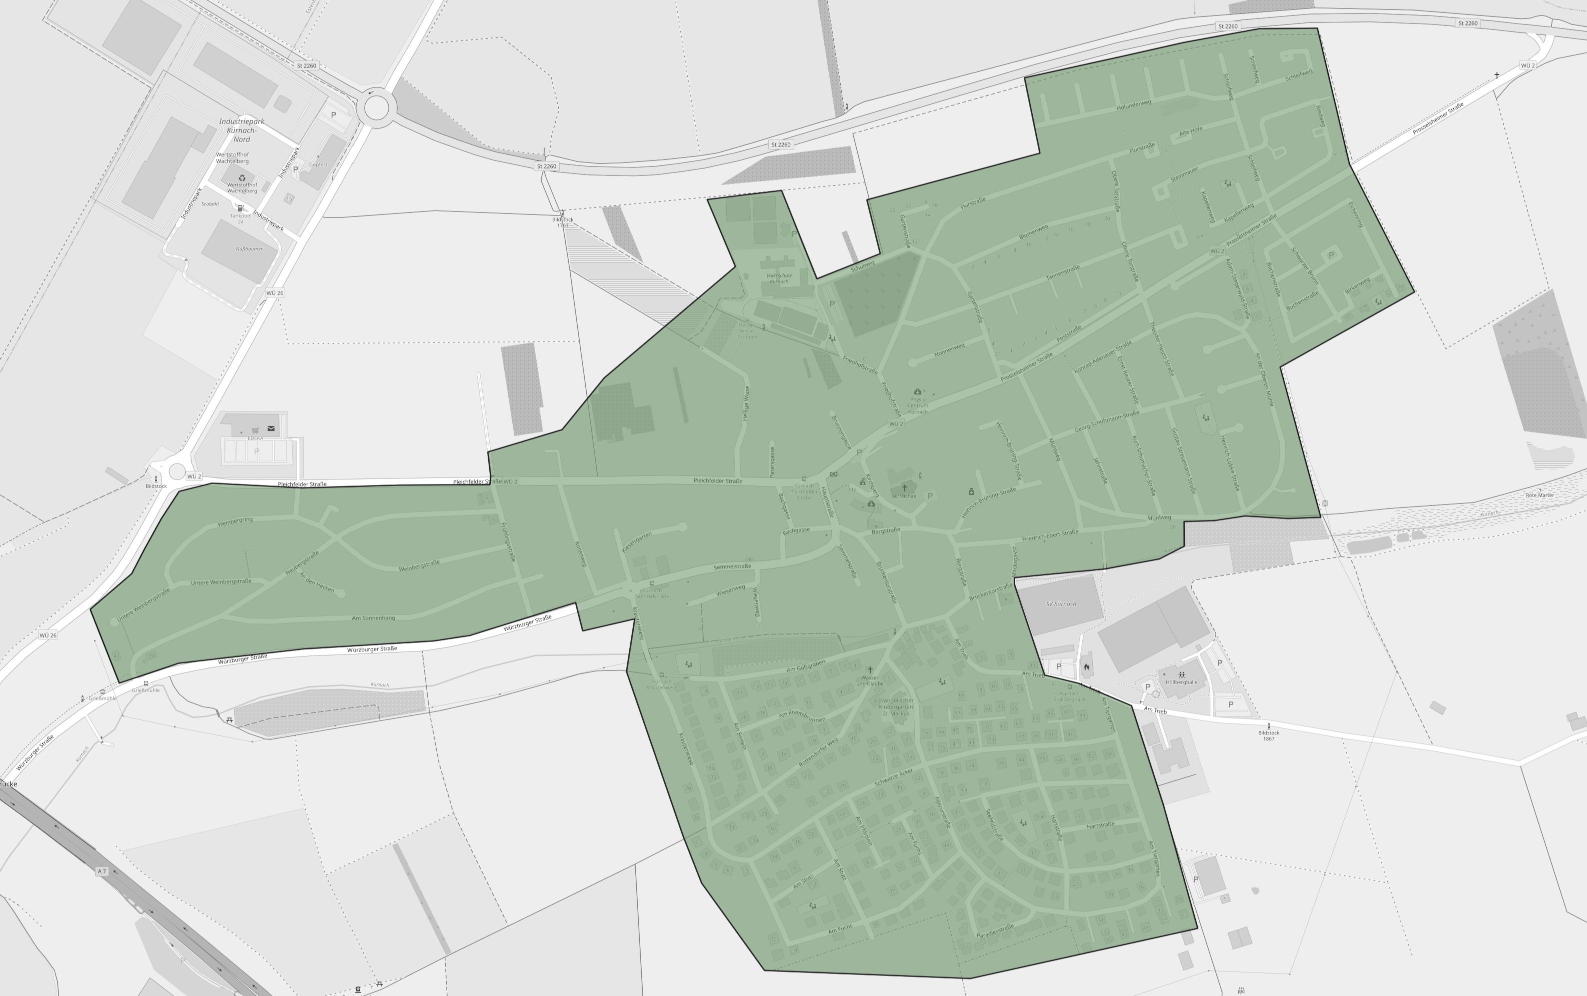 Map of one residential land use polygon